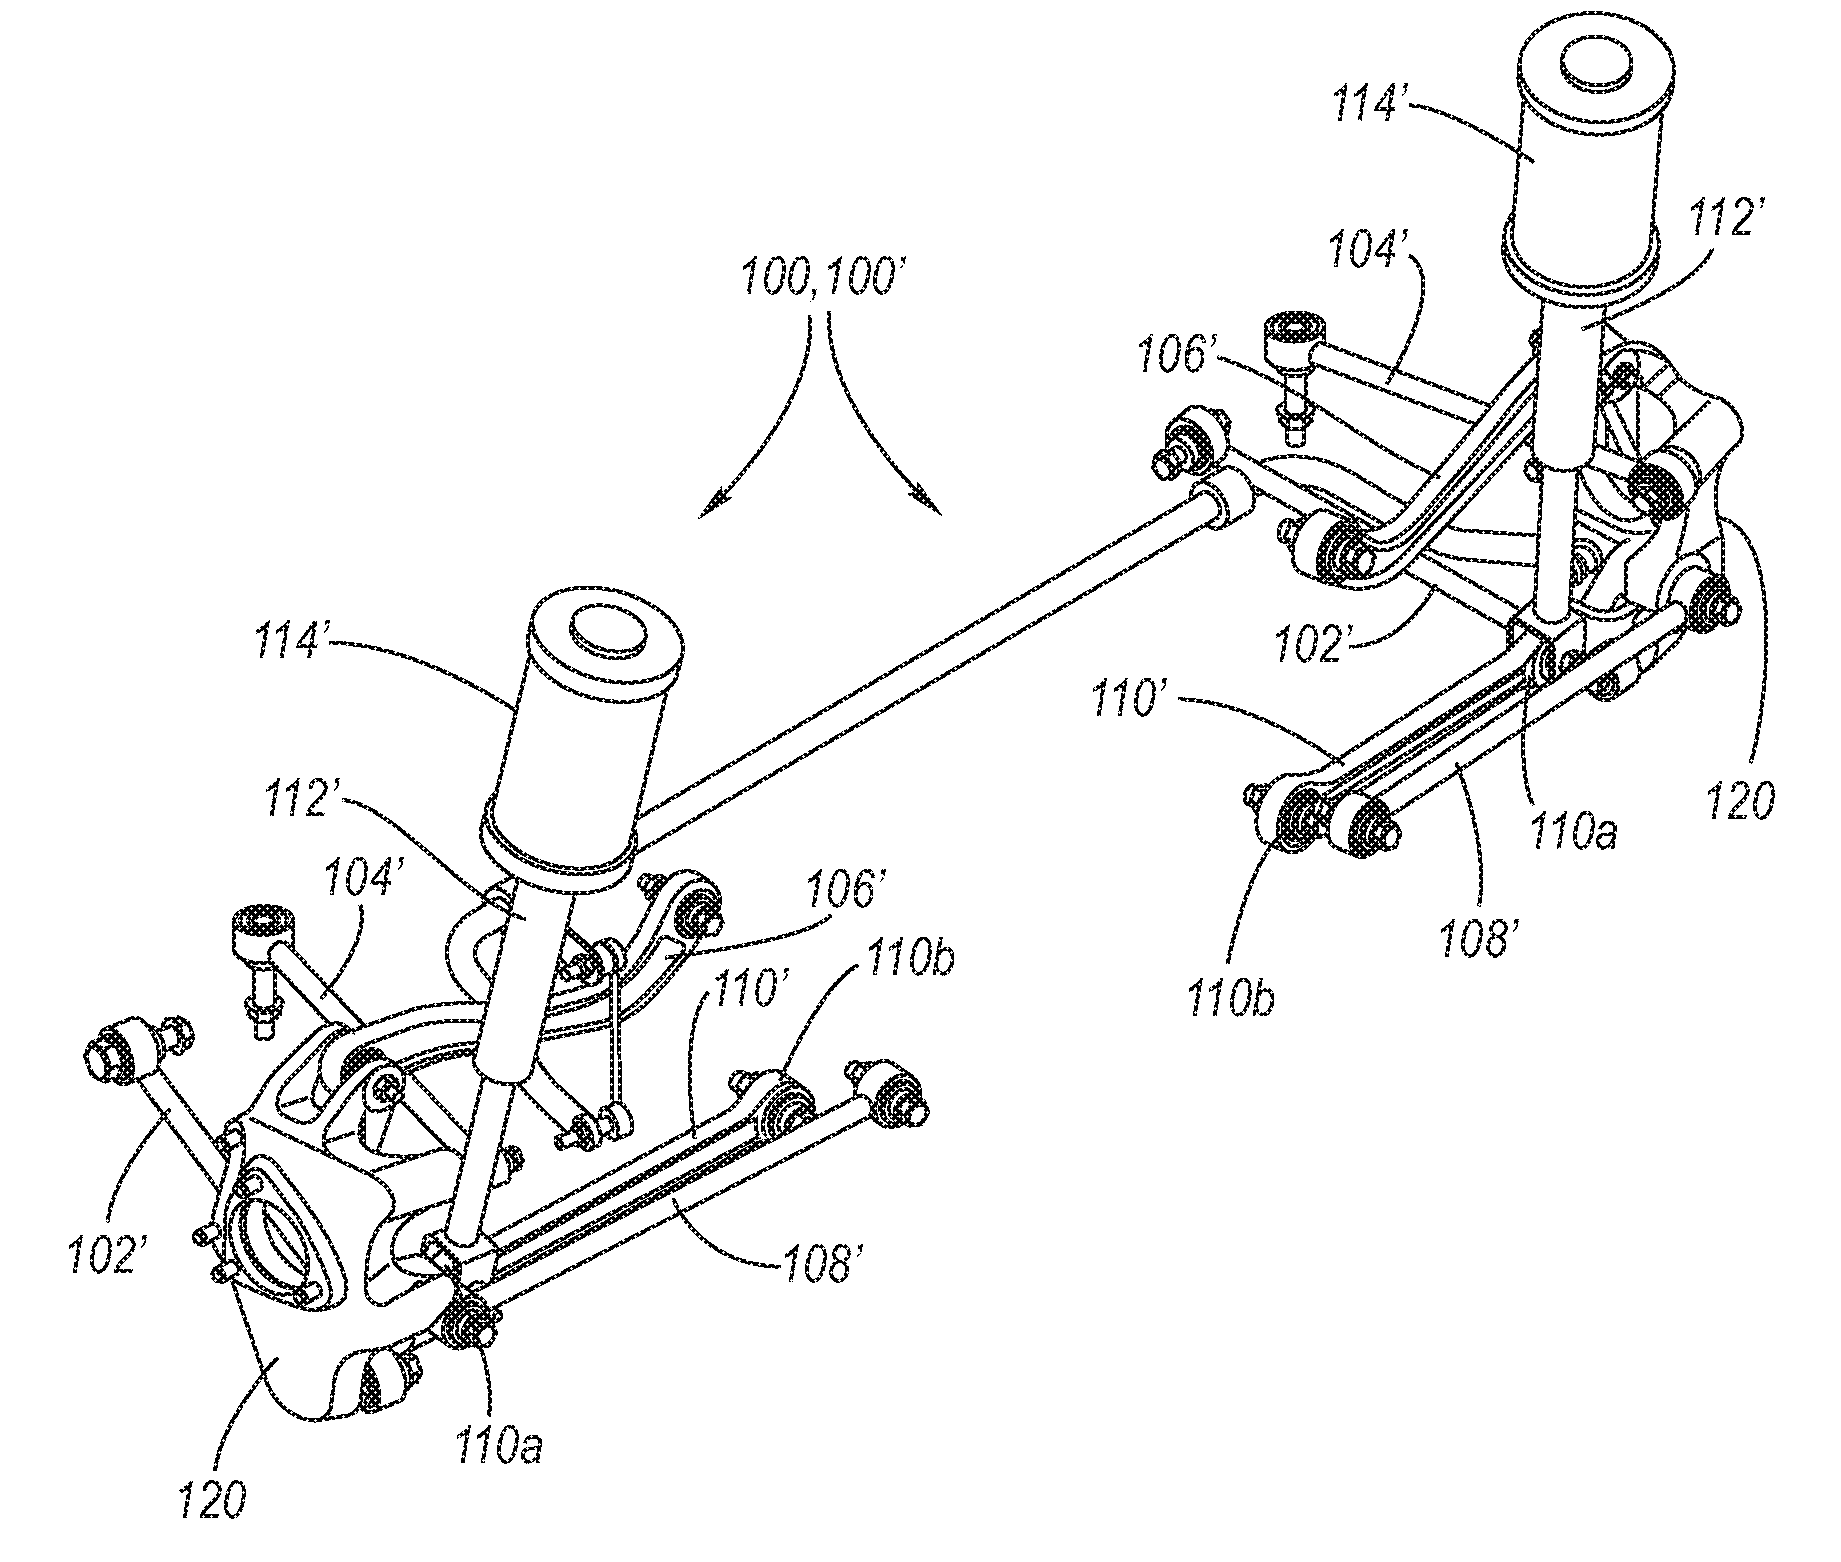 Decoupled 5-link independent rear suspension